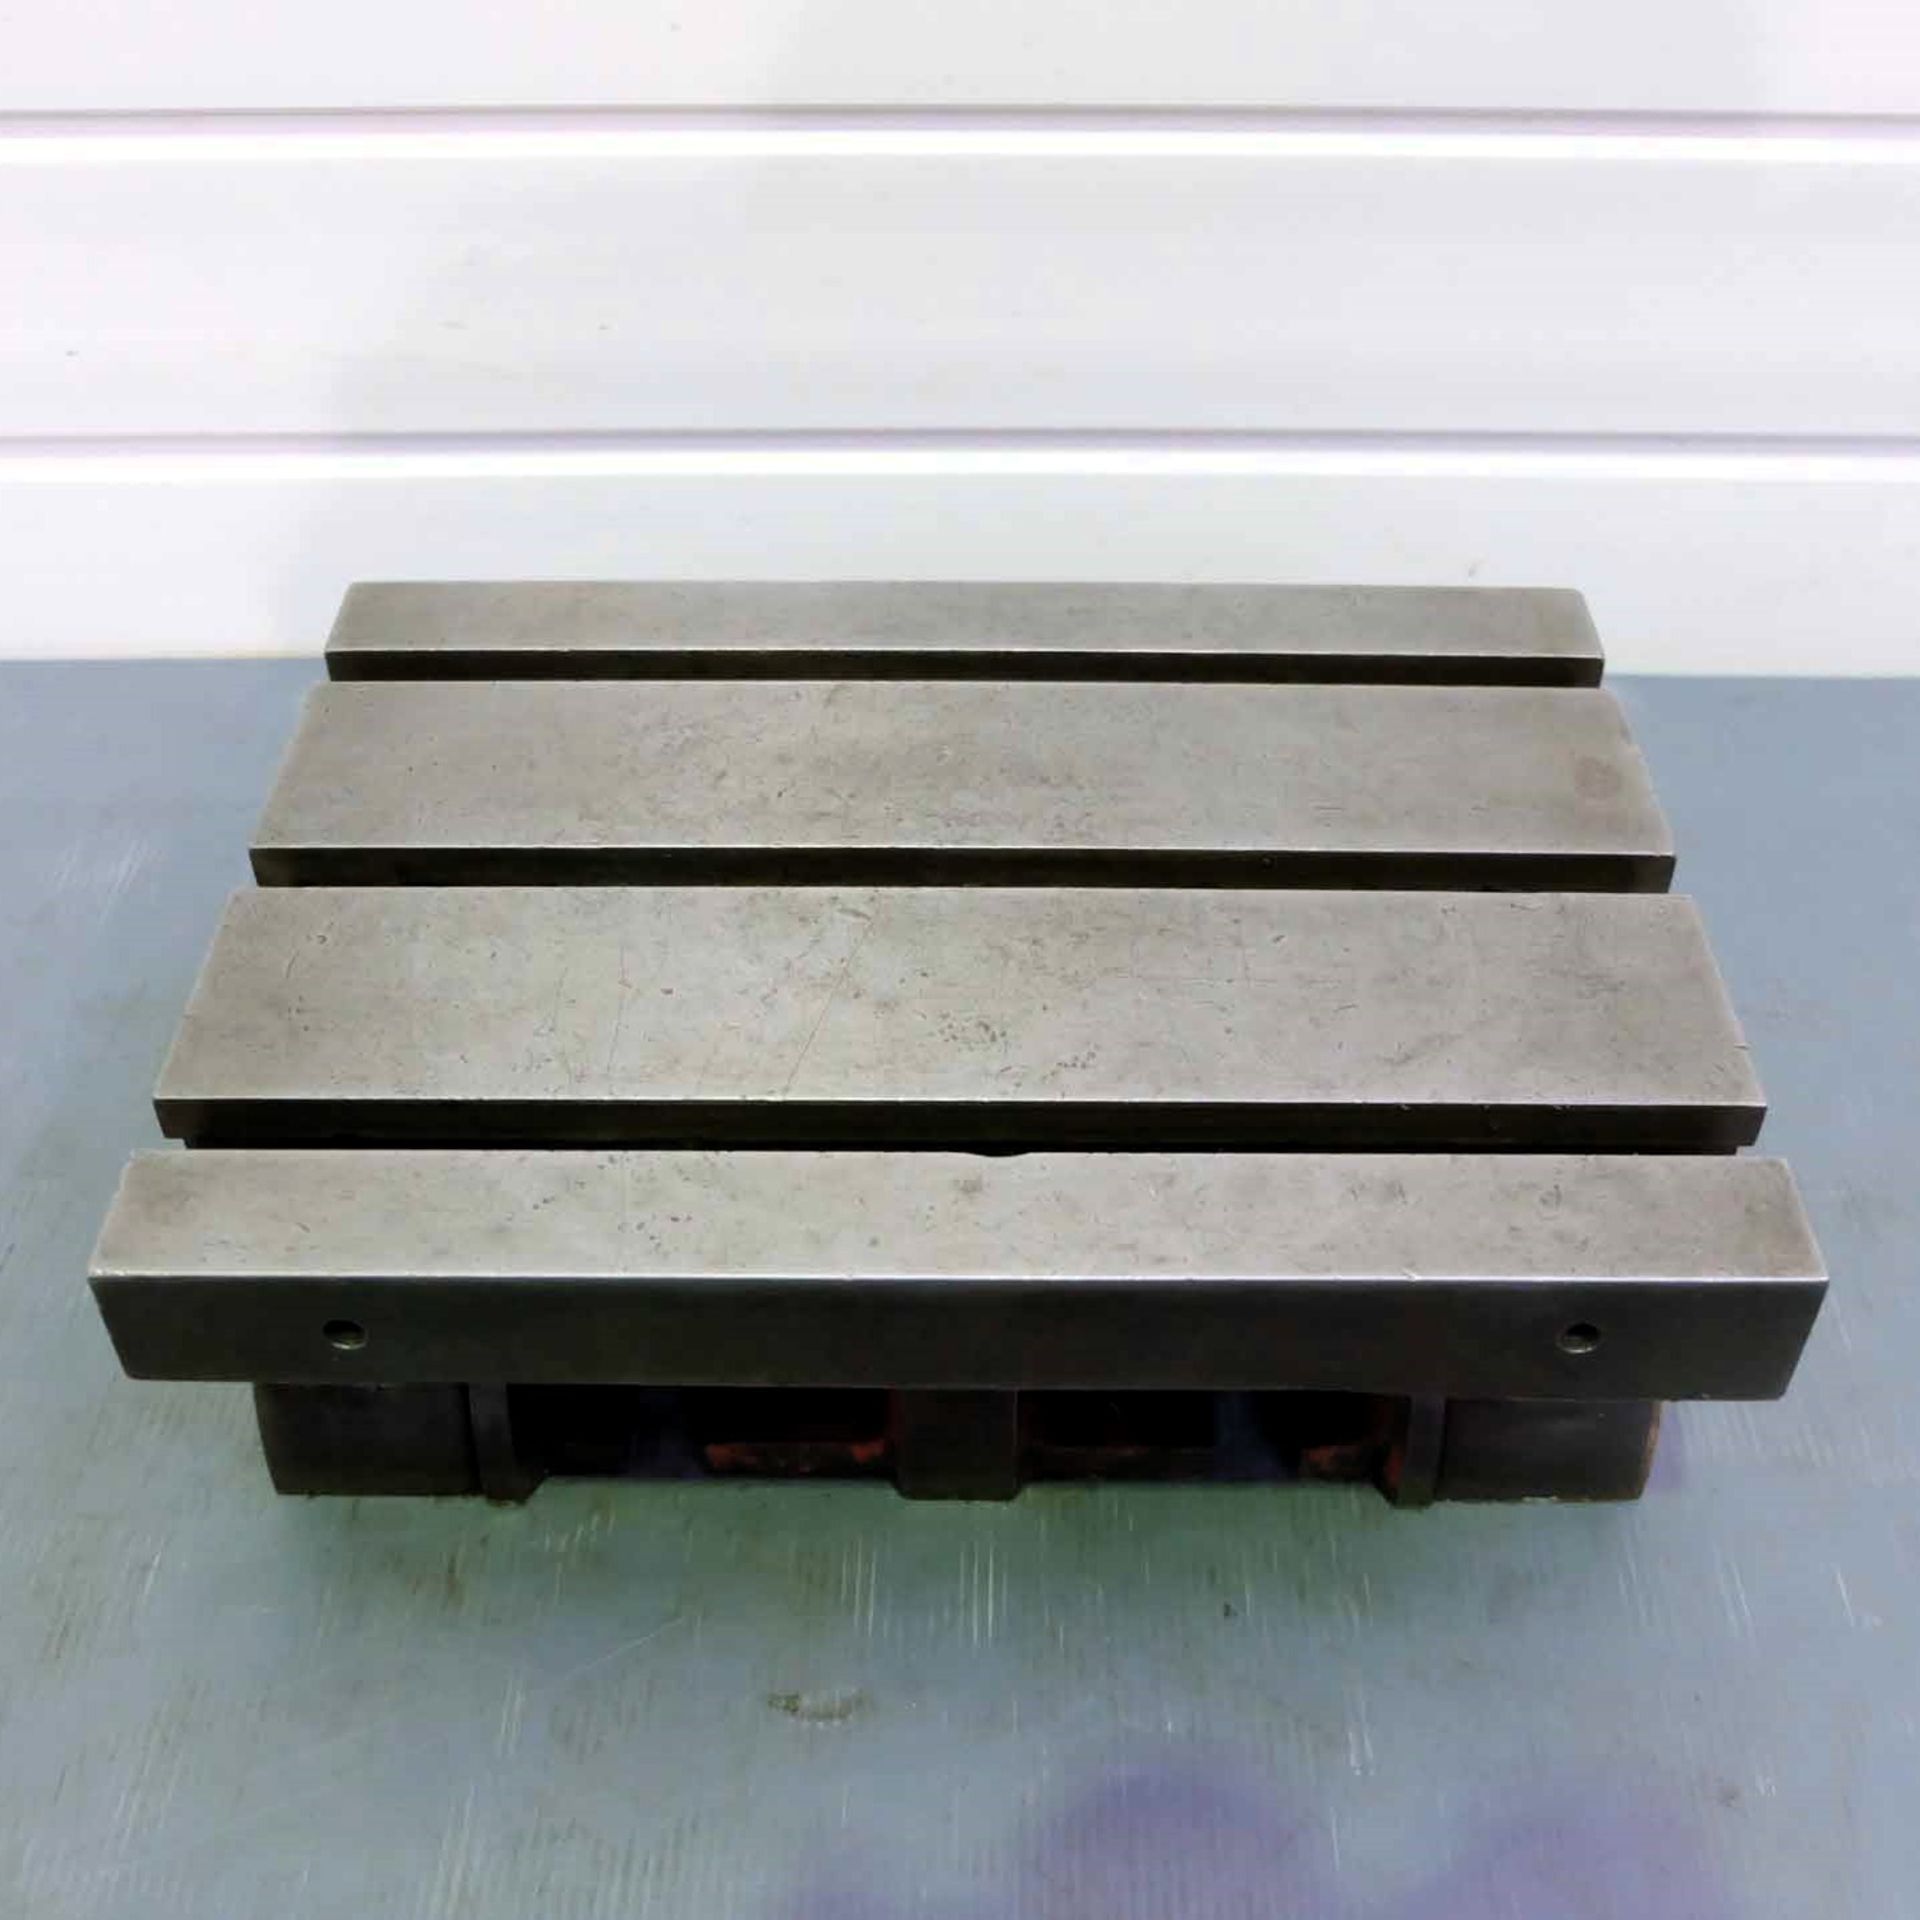 Swivelling Angle Plate. Size 12" x 9" x 4 1/2" H. - Image 2 of 6